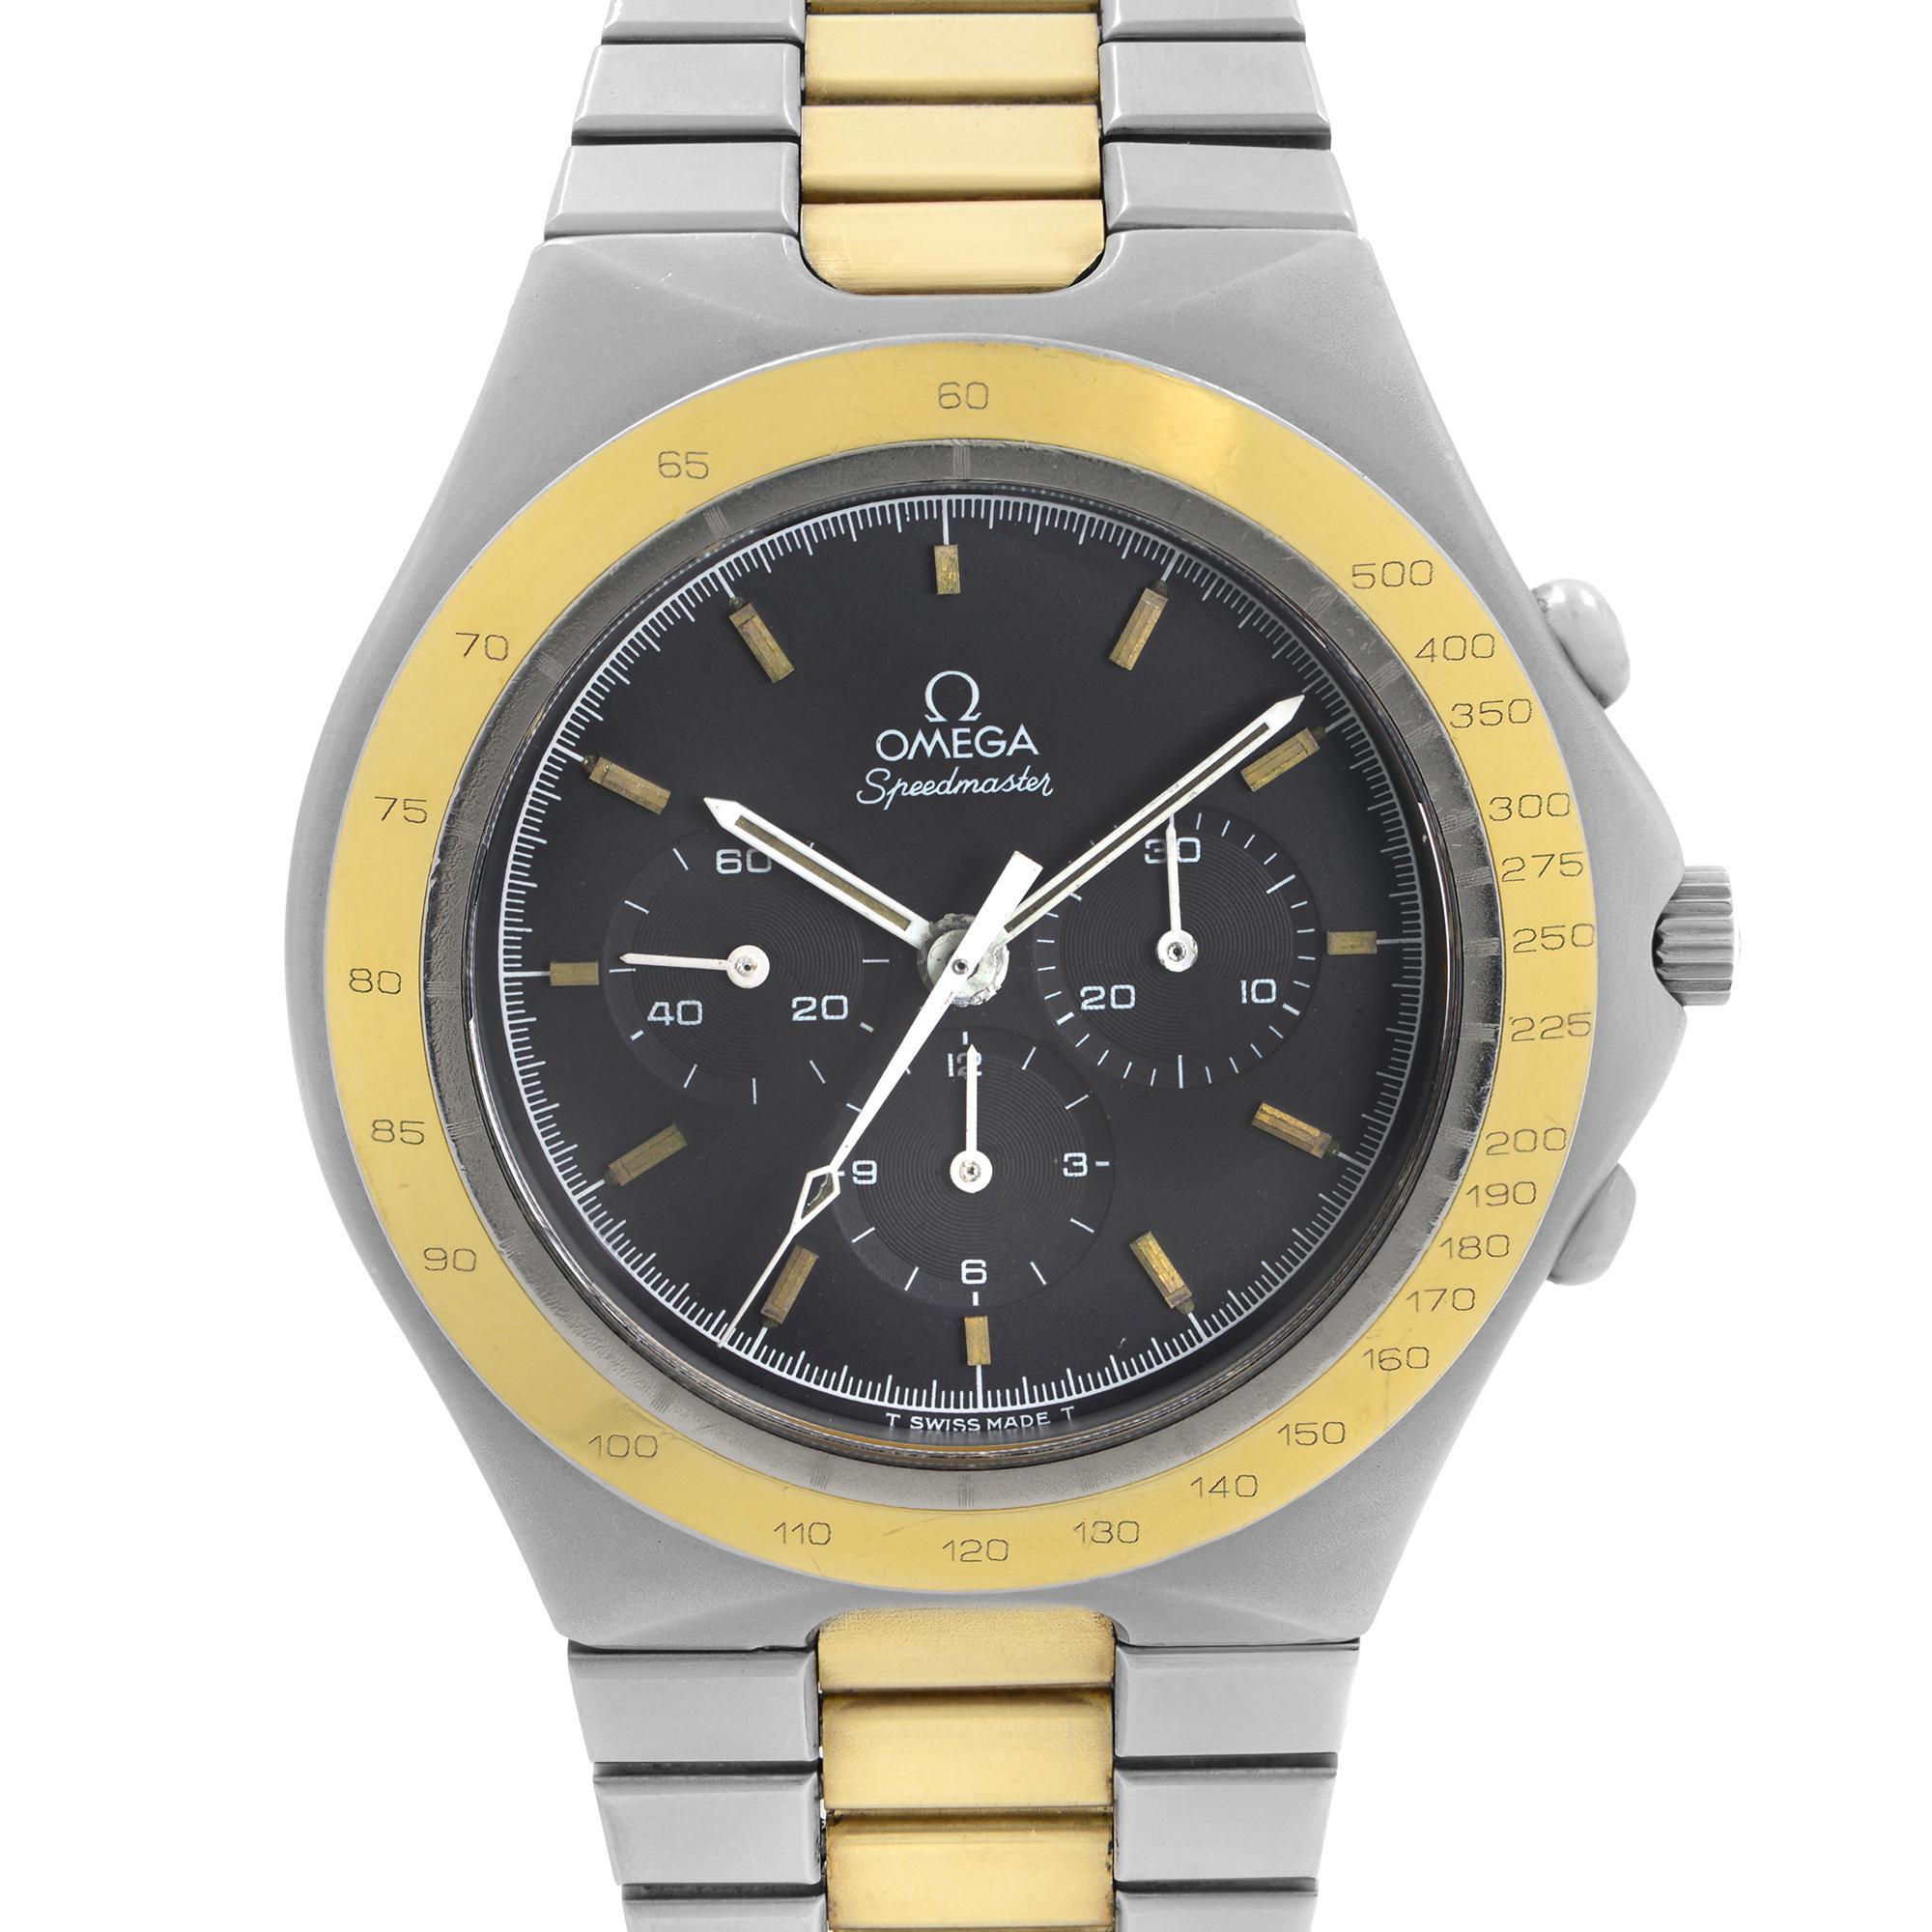 Vintage Omega Speedmaster Chronograph Two-Tone Steel Black Black Dial Hand-Wind Men's Watch 1450040. The band has 18K gold Plated Mid Links. Moderate Slack on the Bracelet, Scratches on the Bracelet Case, and Bezel. Small Scratches On the Dial. Dirt